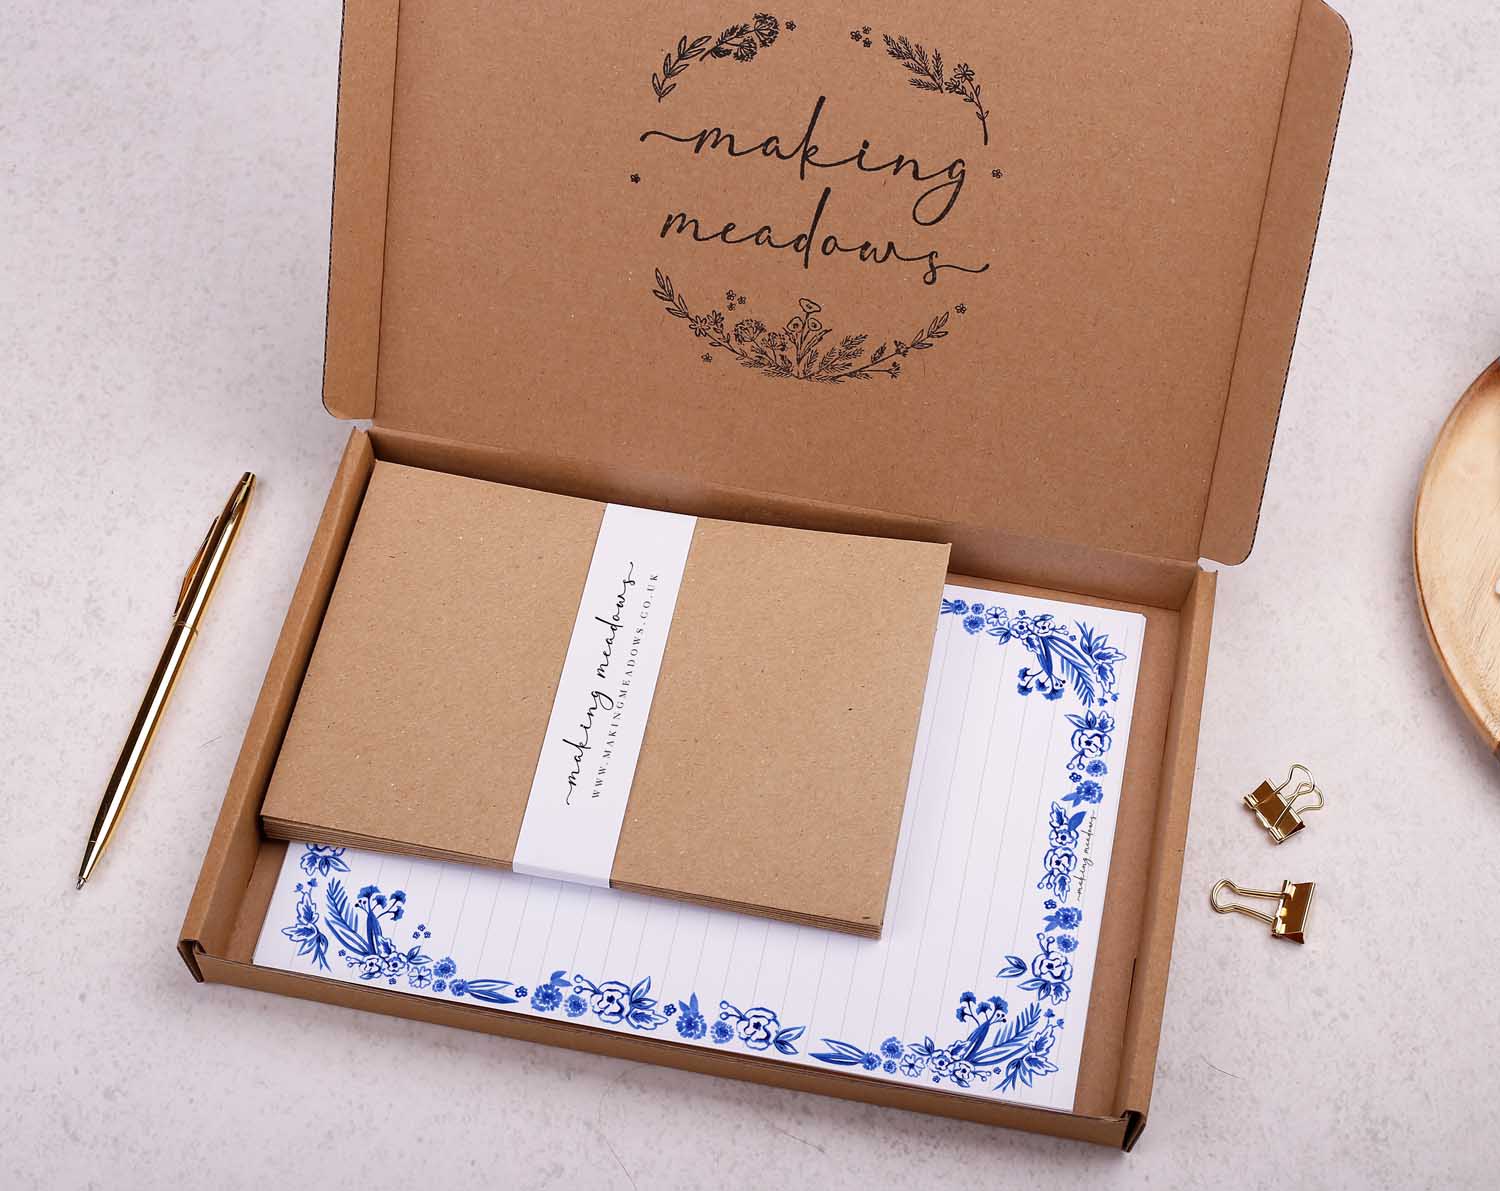 32 sheets of blue oriental design writing paper in a gift box set.